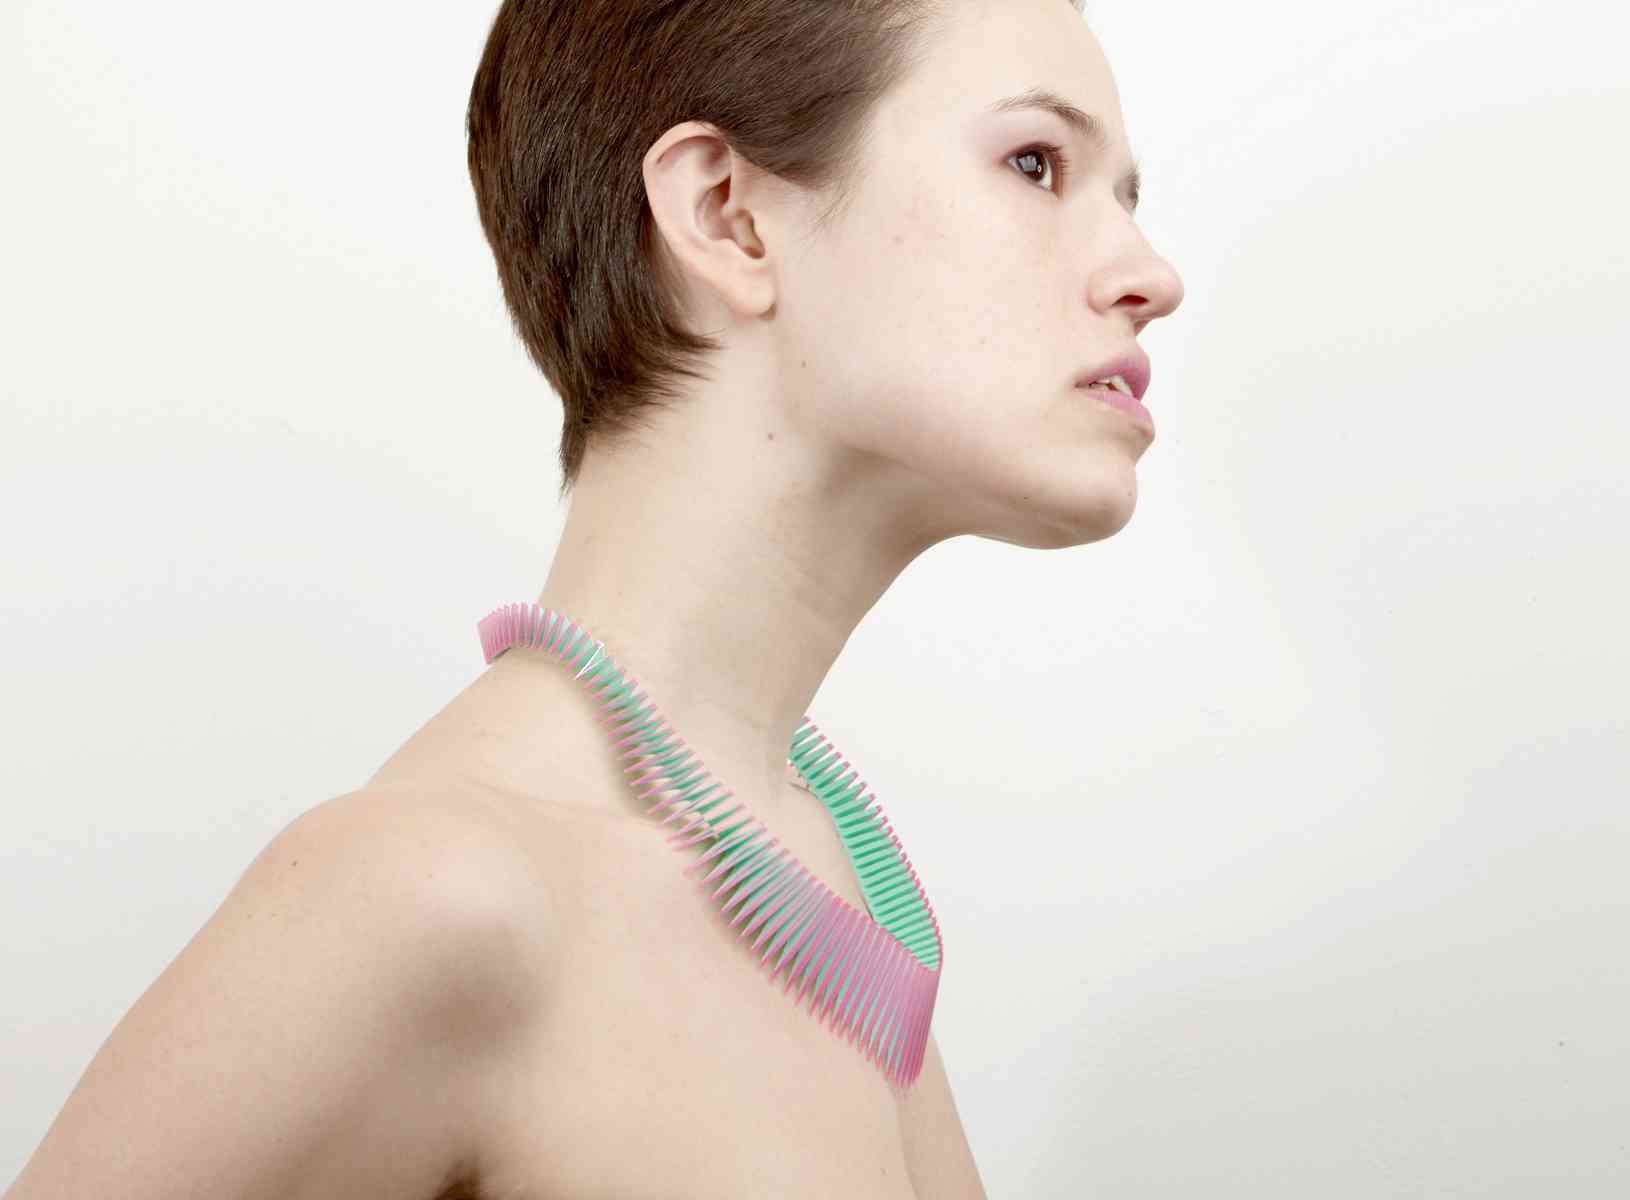 Rentaro Nishimura: FDM 3D printed necklace - 3D printed necklace made of thermoplastic polyurethane using FDM 3D printing process.